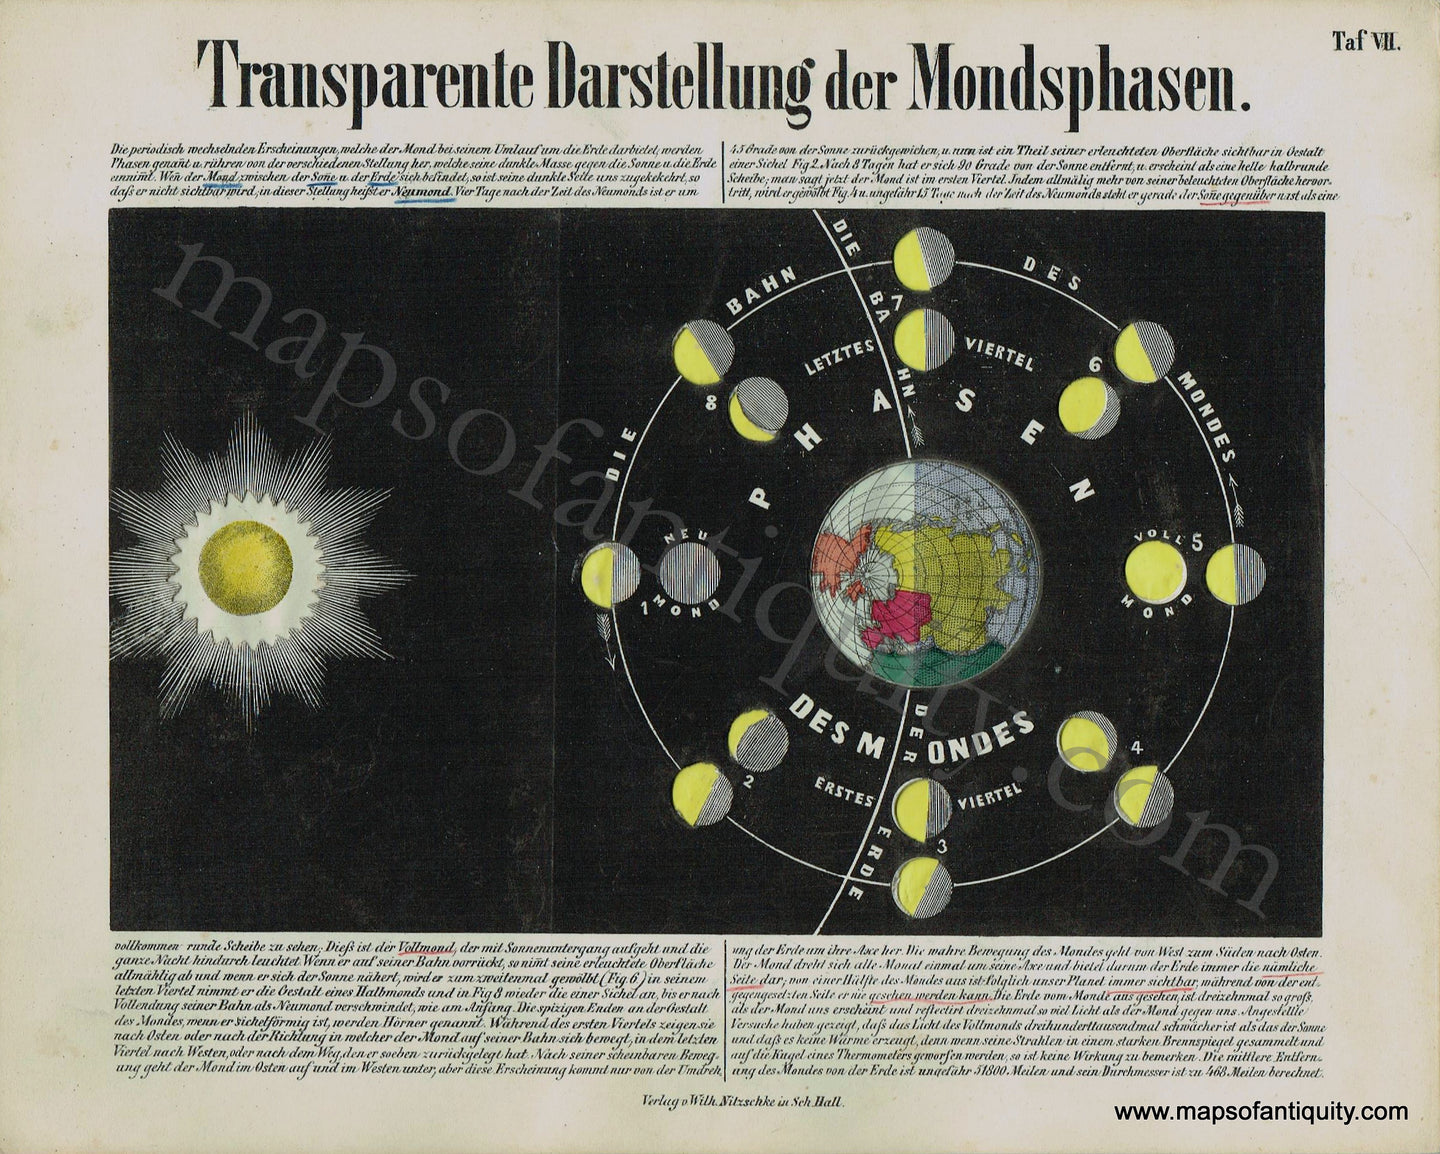 Antique-Hand-Colored-Hold-to-Light-Celestial-Map-Transparent-Representation-of-the-Moon-Phases-Transparente-Darstellung-der-Mondphasen.-1851-Wilhelm-Nitzchke-1800s-19th-century-Maps-of-Antiquity